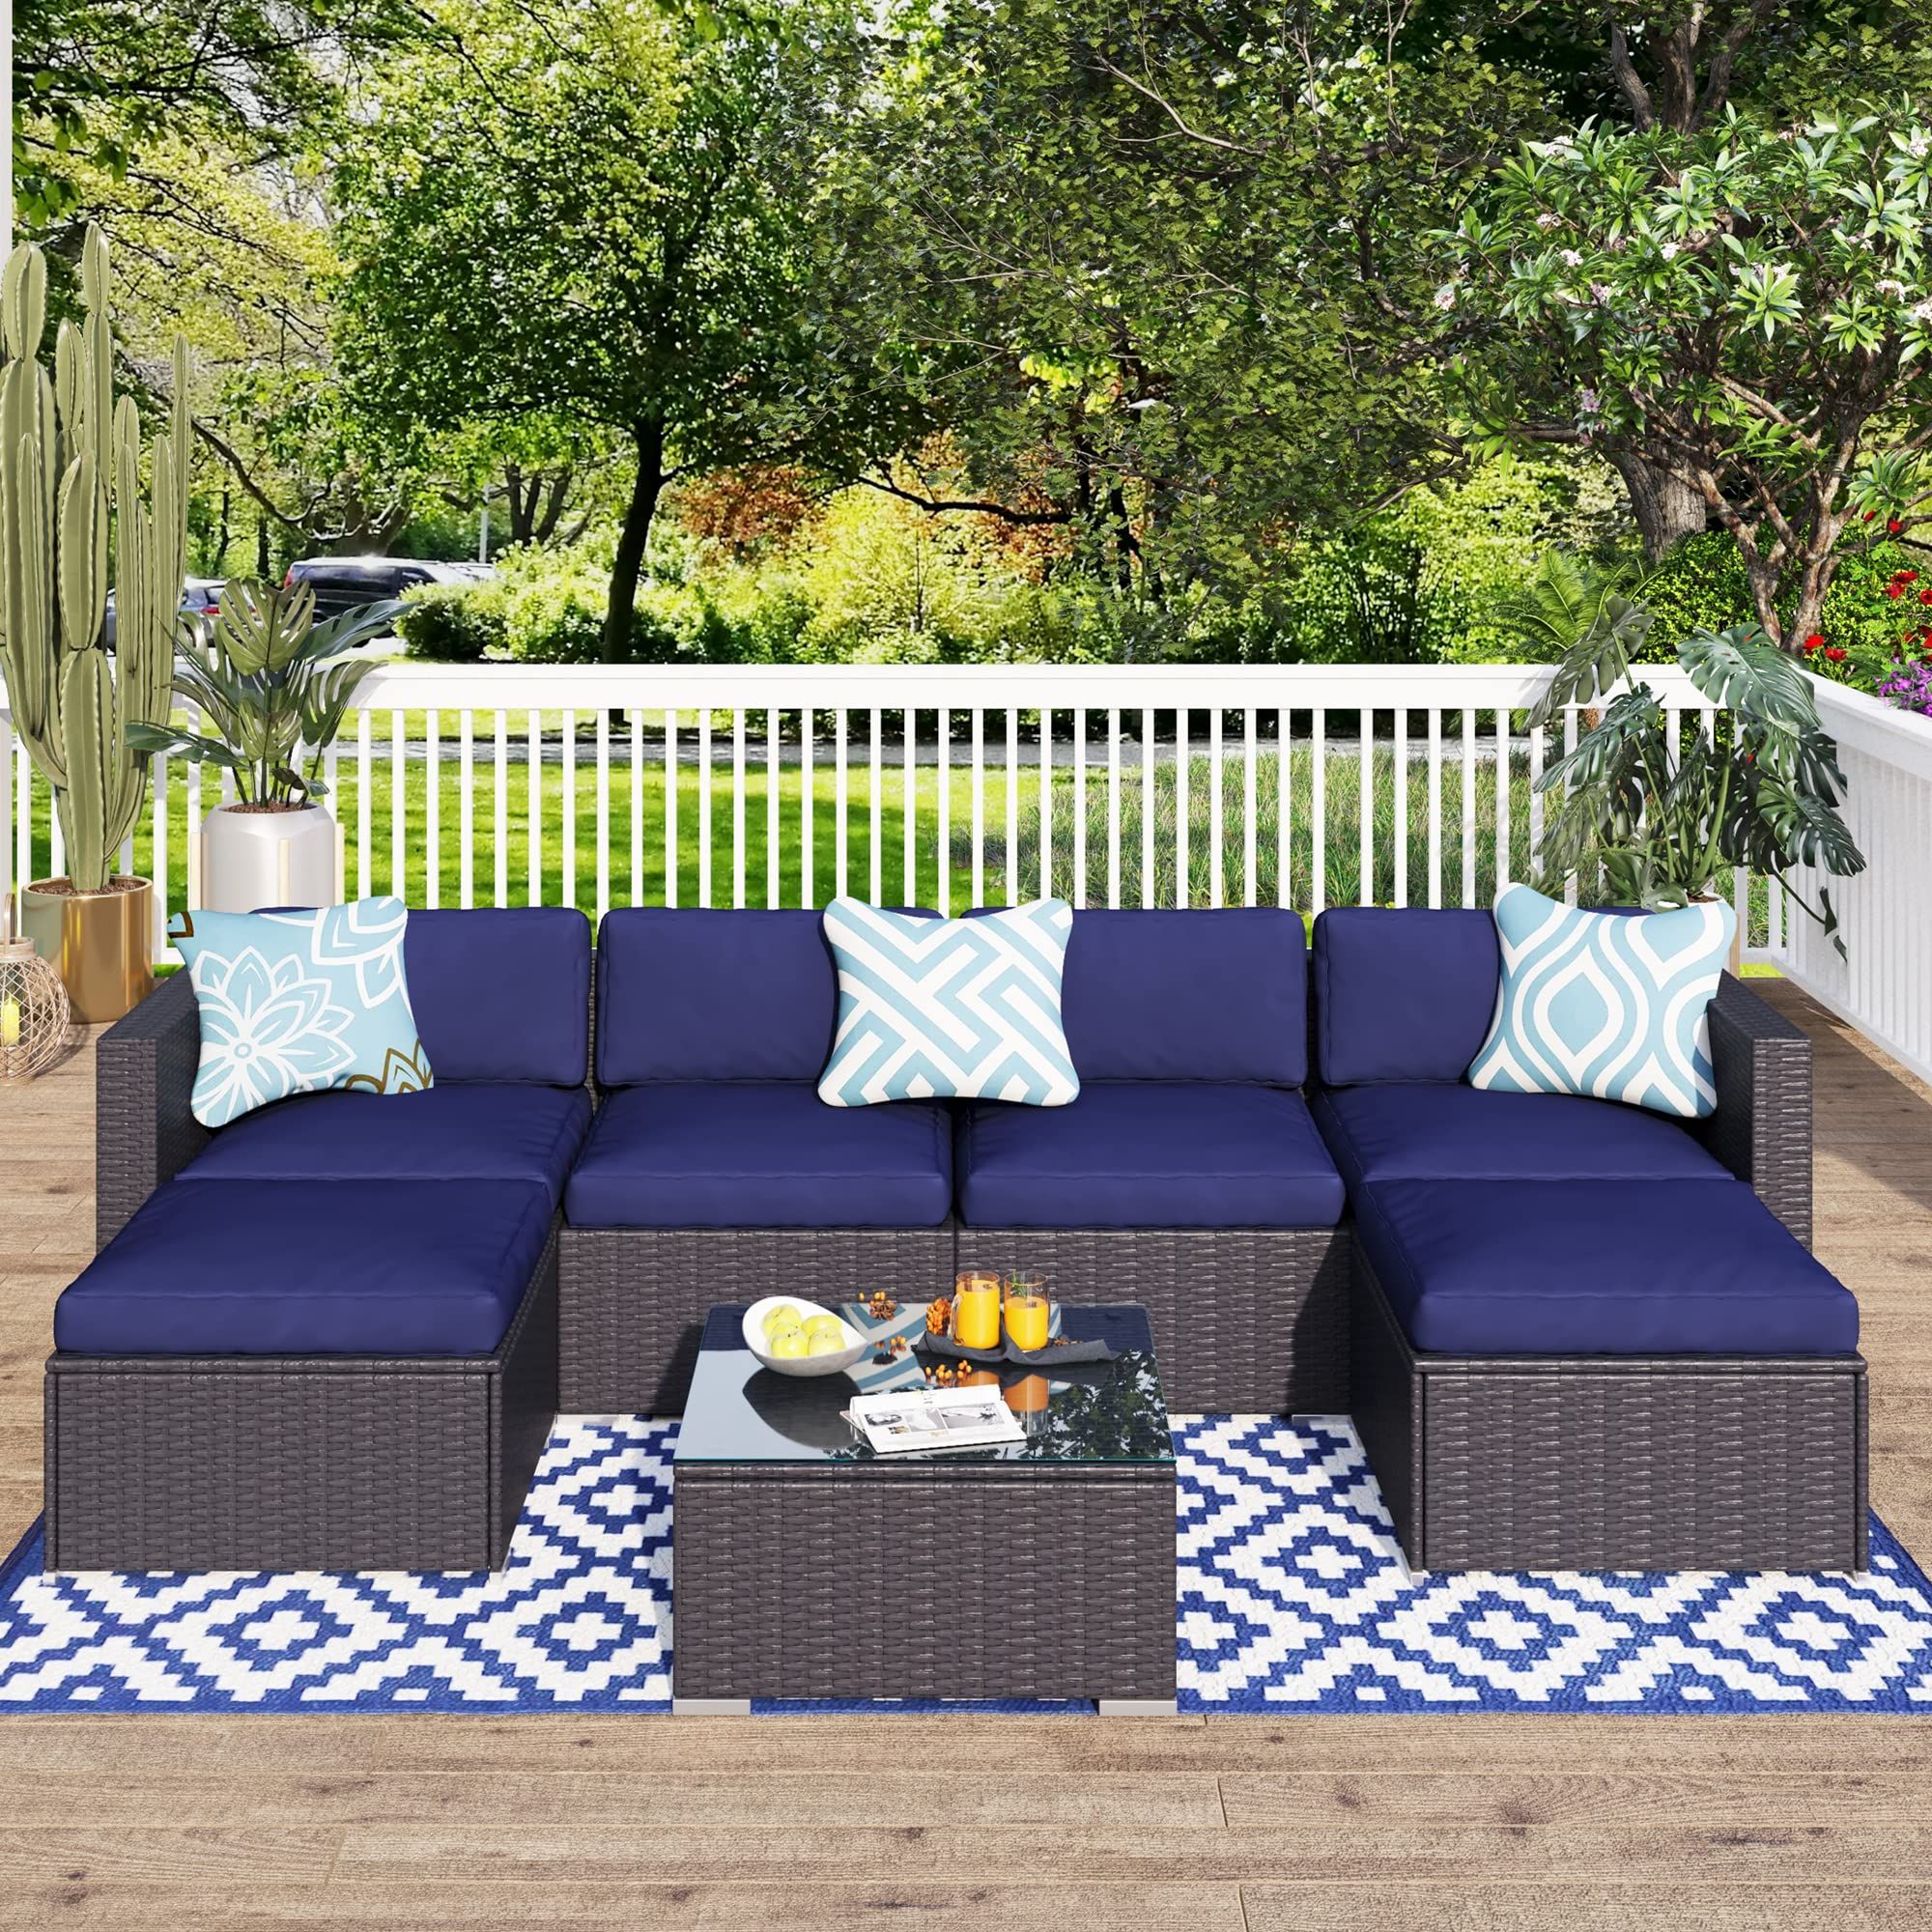 Newest Amazon: Mfstudio Outdoor Patio Furniture Set,7 Pieces All Weather  Wicker Outdoor Couch Sectional Sofa,rattan Patio Conversation Set With  Coffee Table, Blue Washable Cushion : Patio, Lawn & Garden Inside All Weather Rattan Conversation Set (Photo 12 of 15)